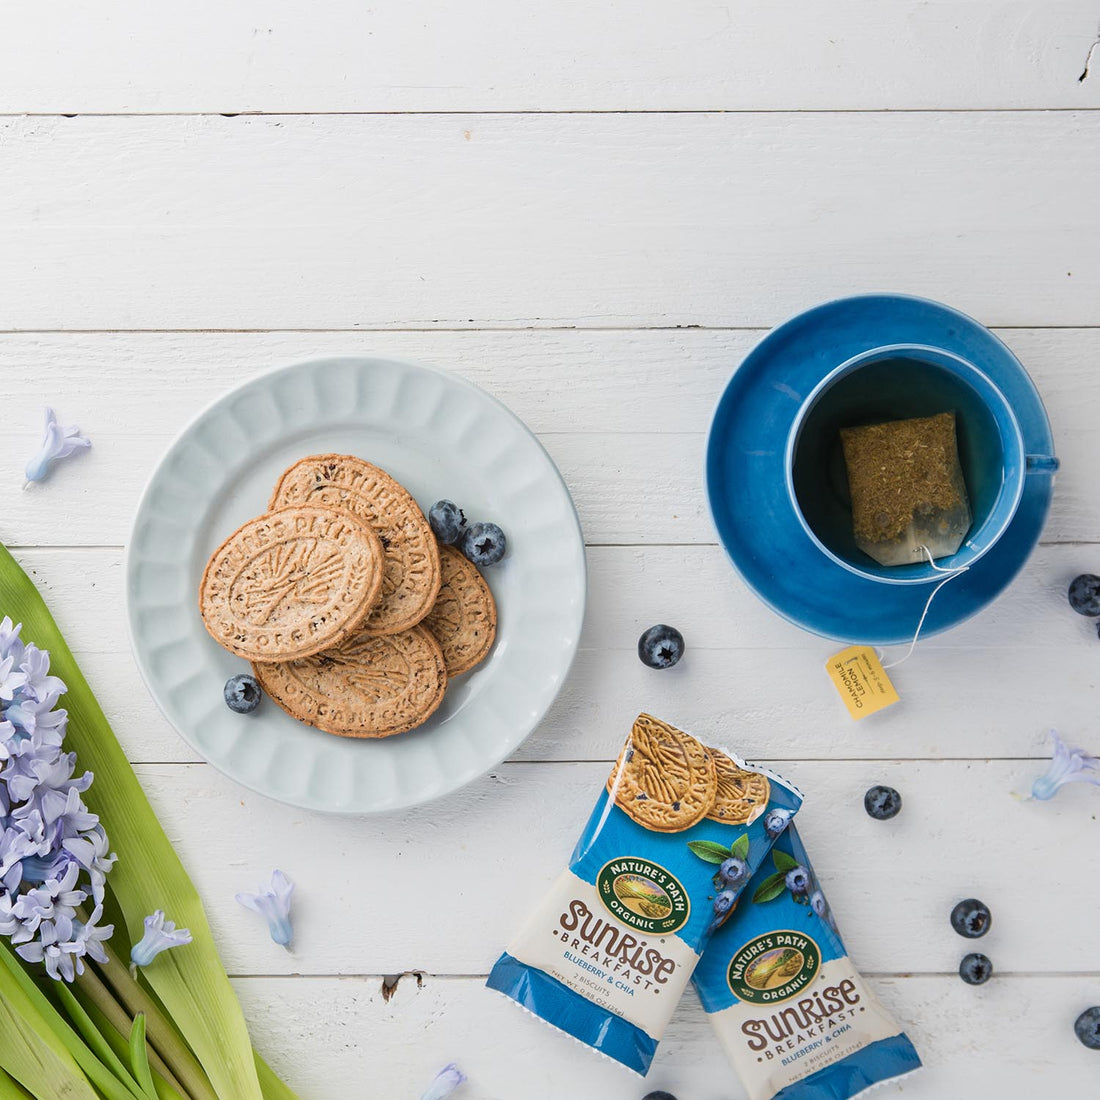 Nature's Path Blueberry & Chia Breakfast Biscuits with tea